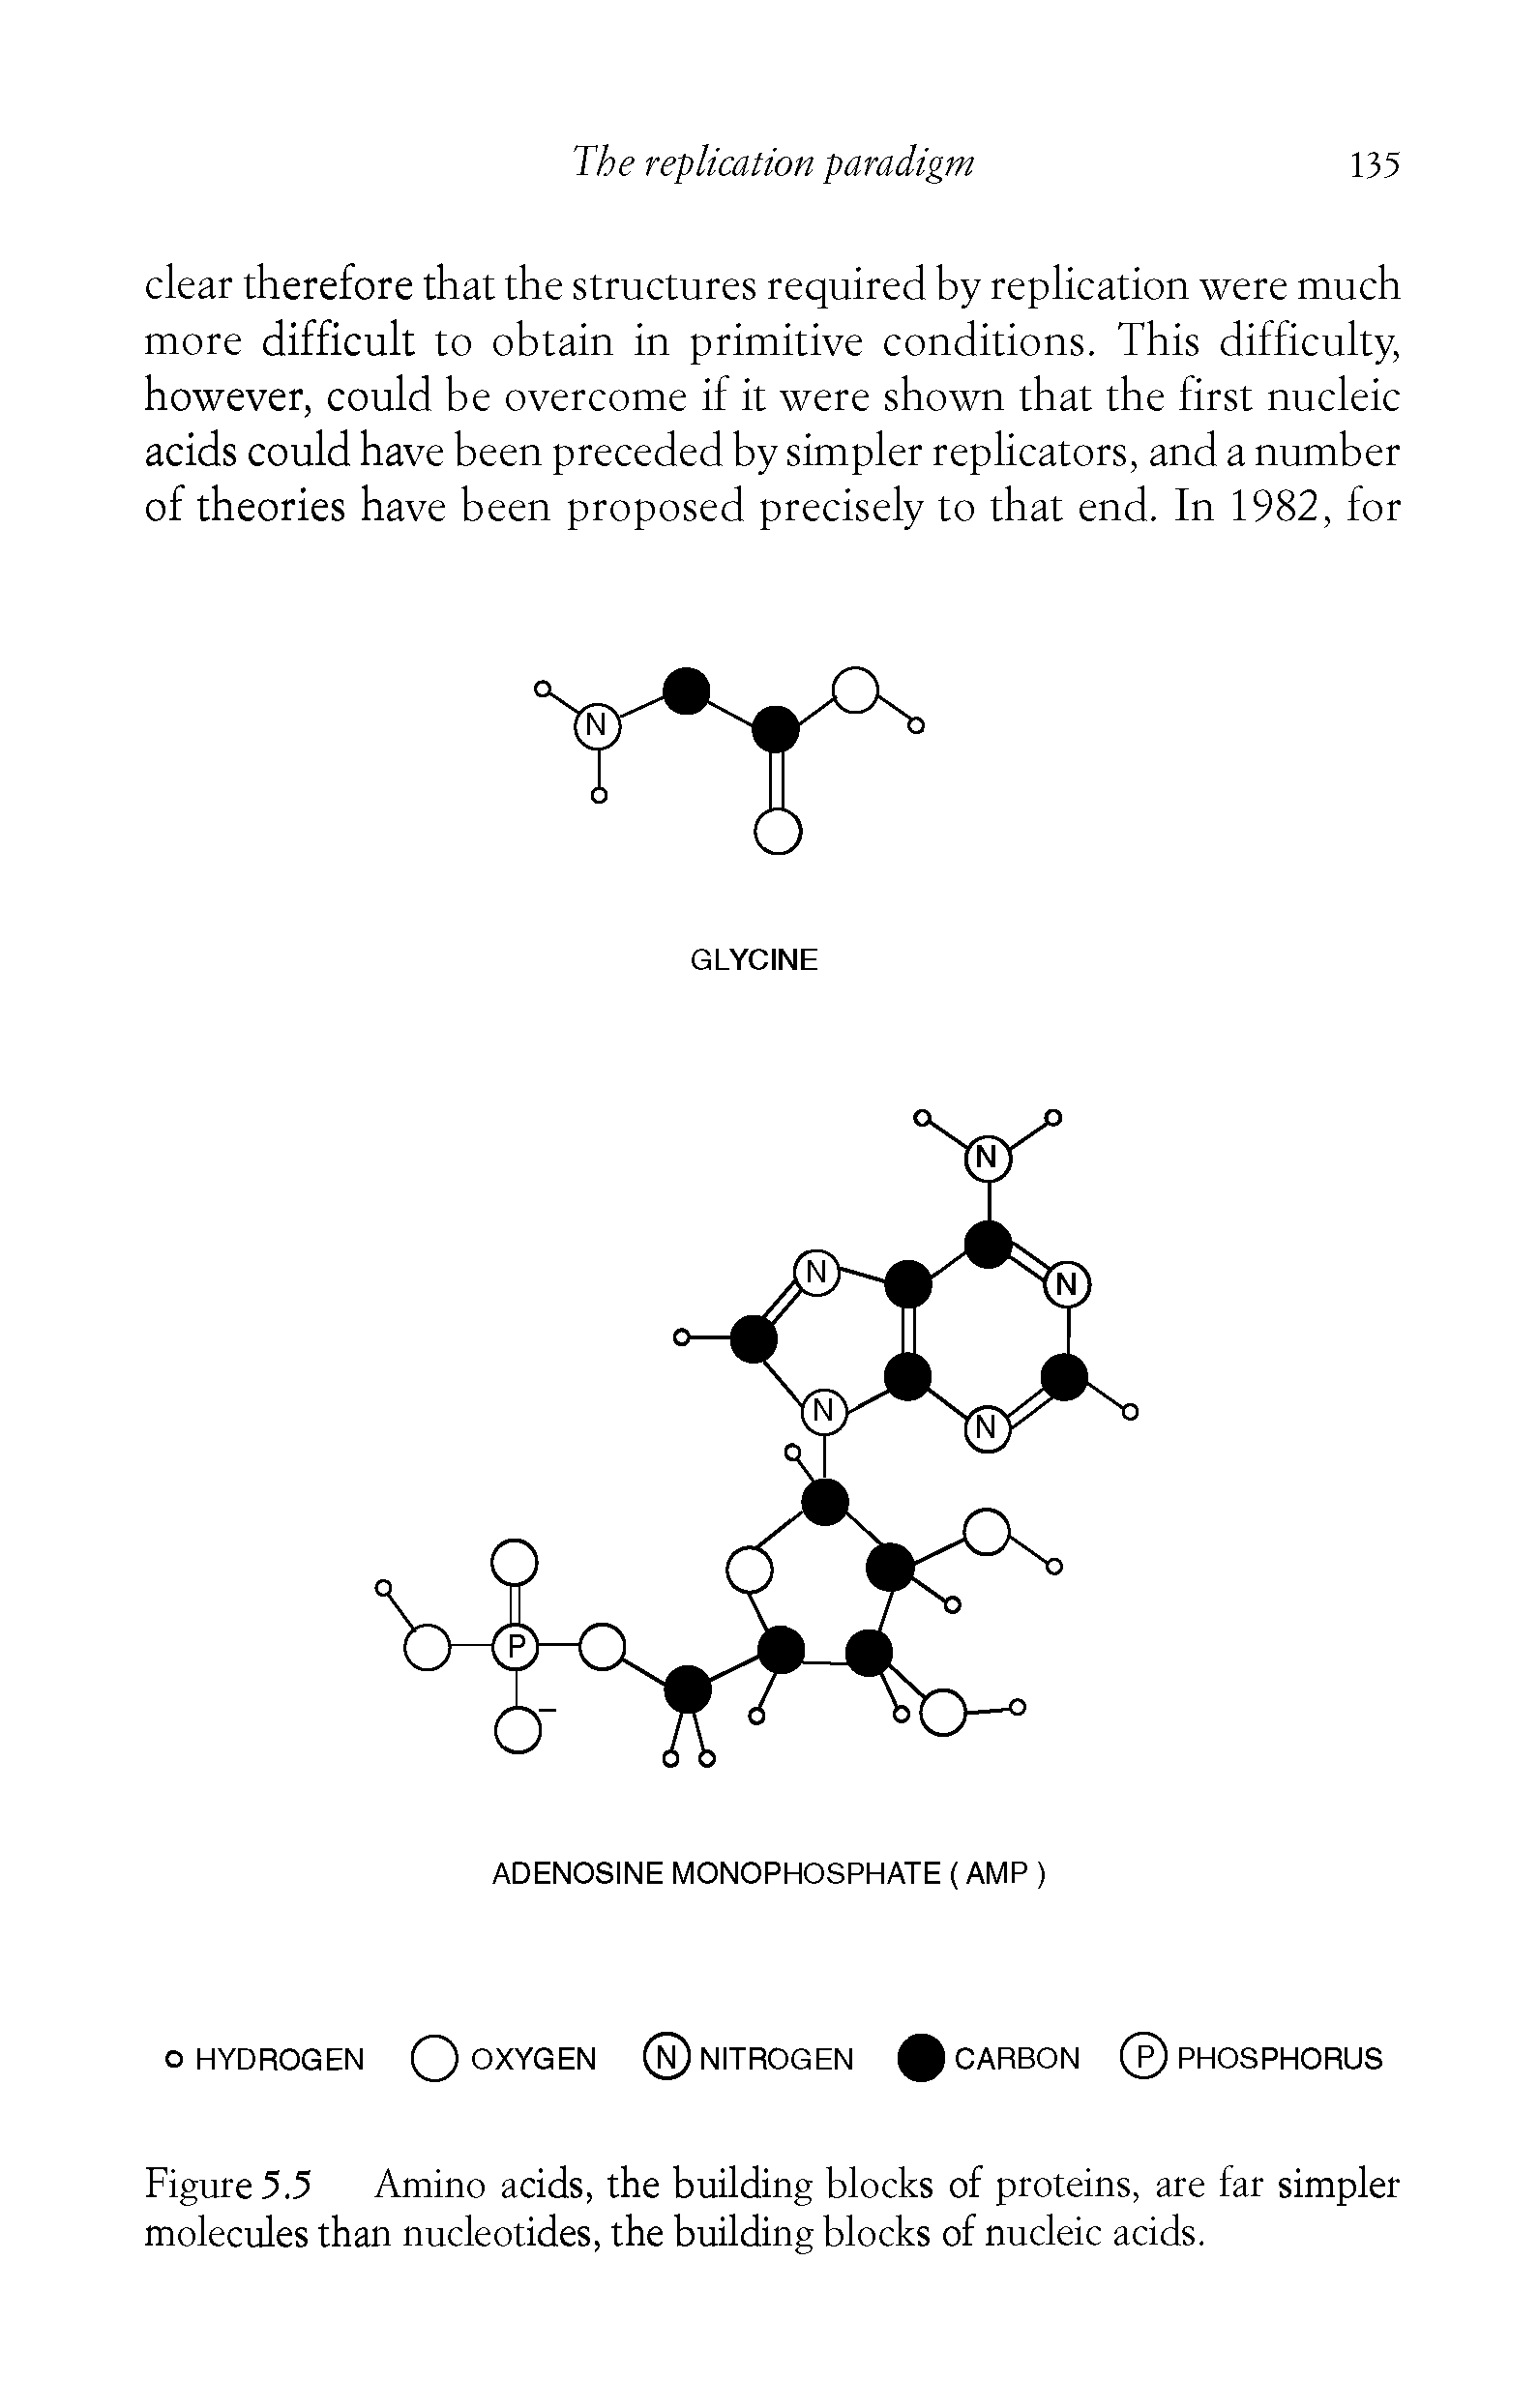 Figure 5.5 Amino acids, the building blocks of proteins, are far simpler molecules than nucleotides, the building blocks of nucleic acids.